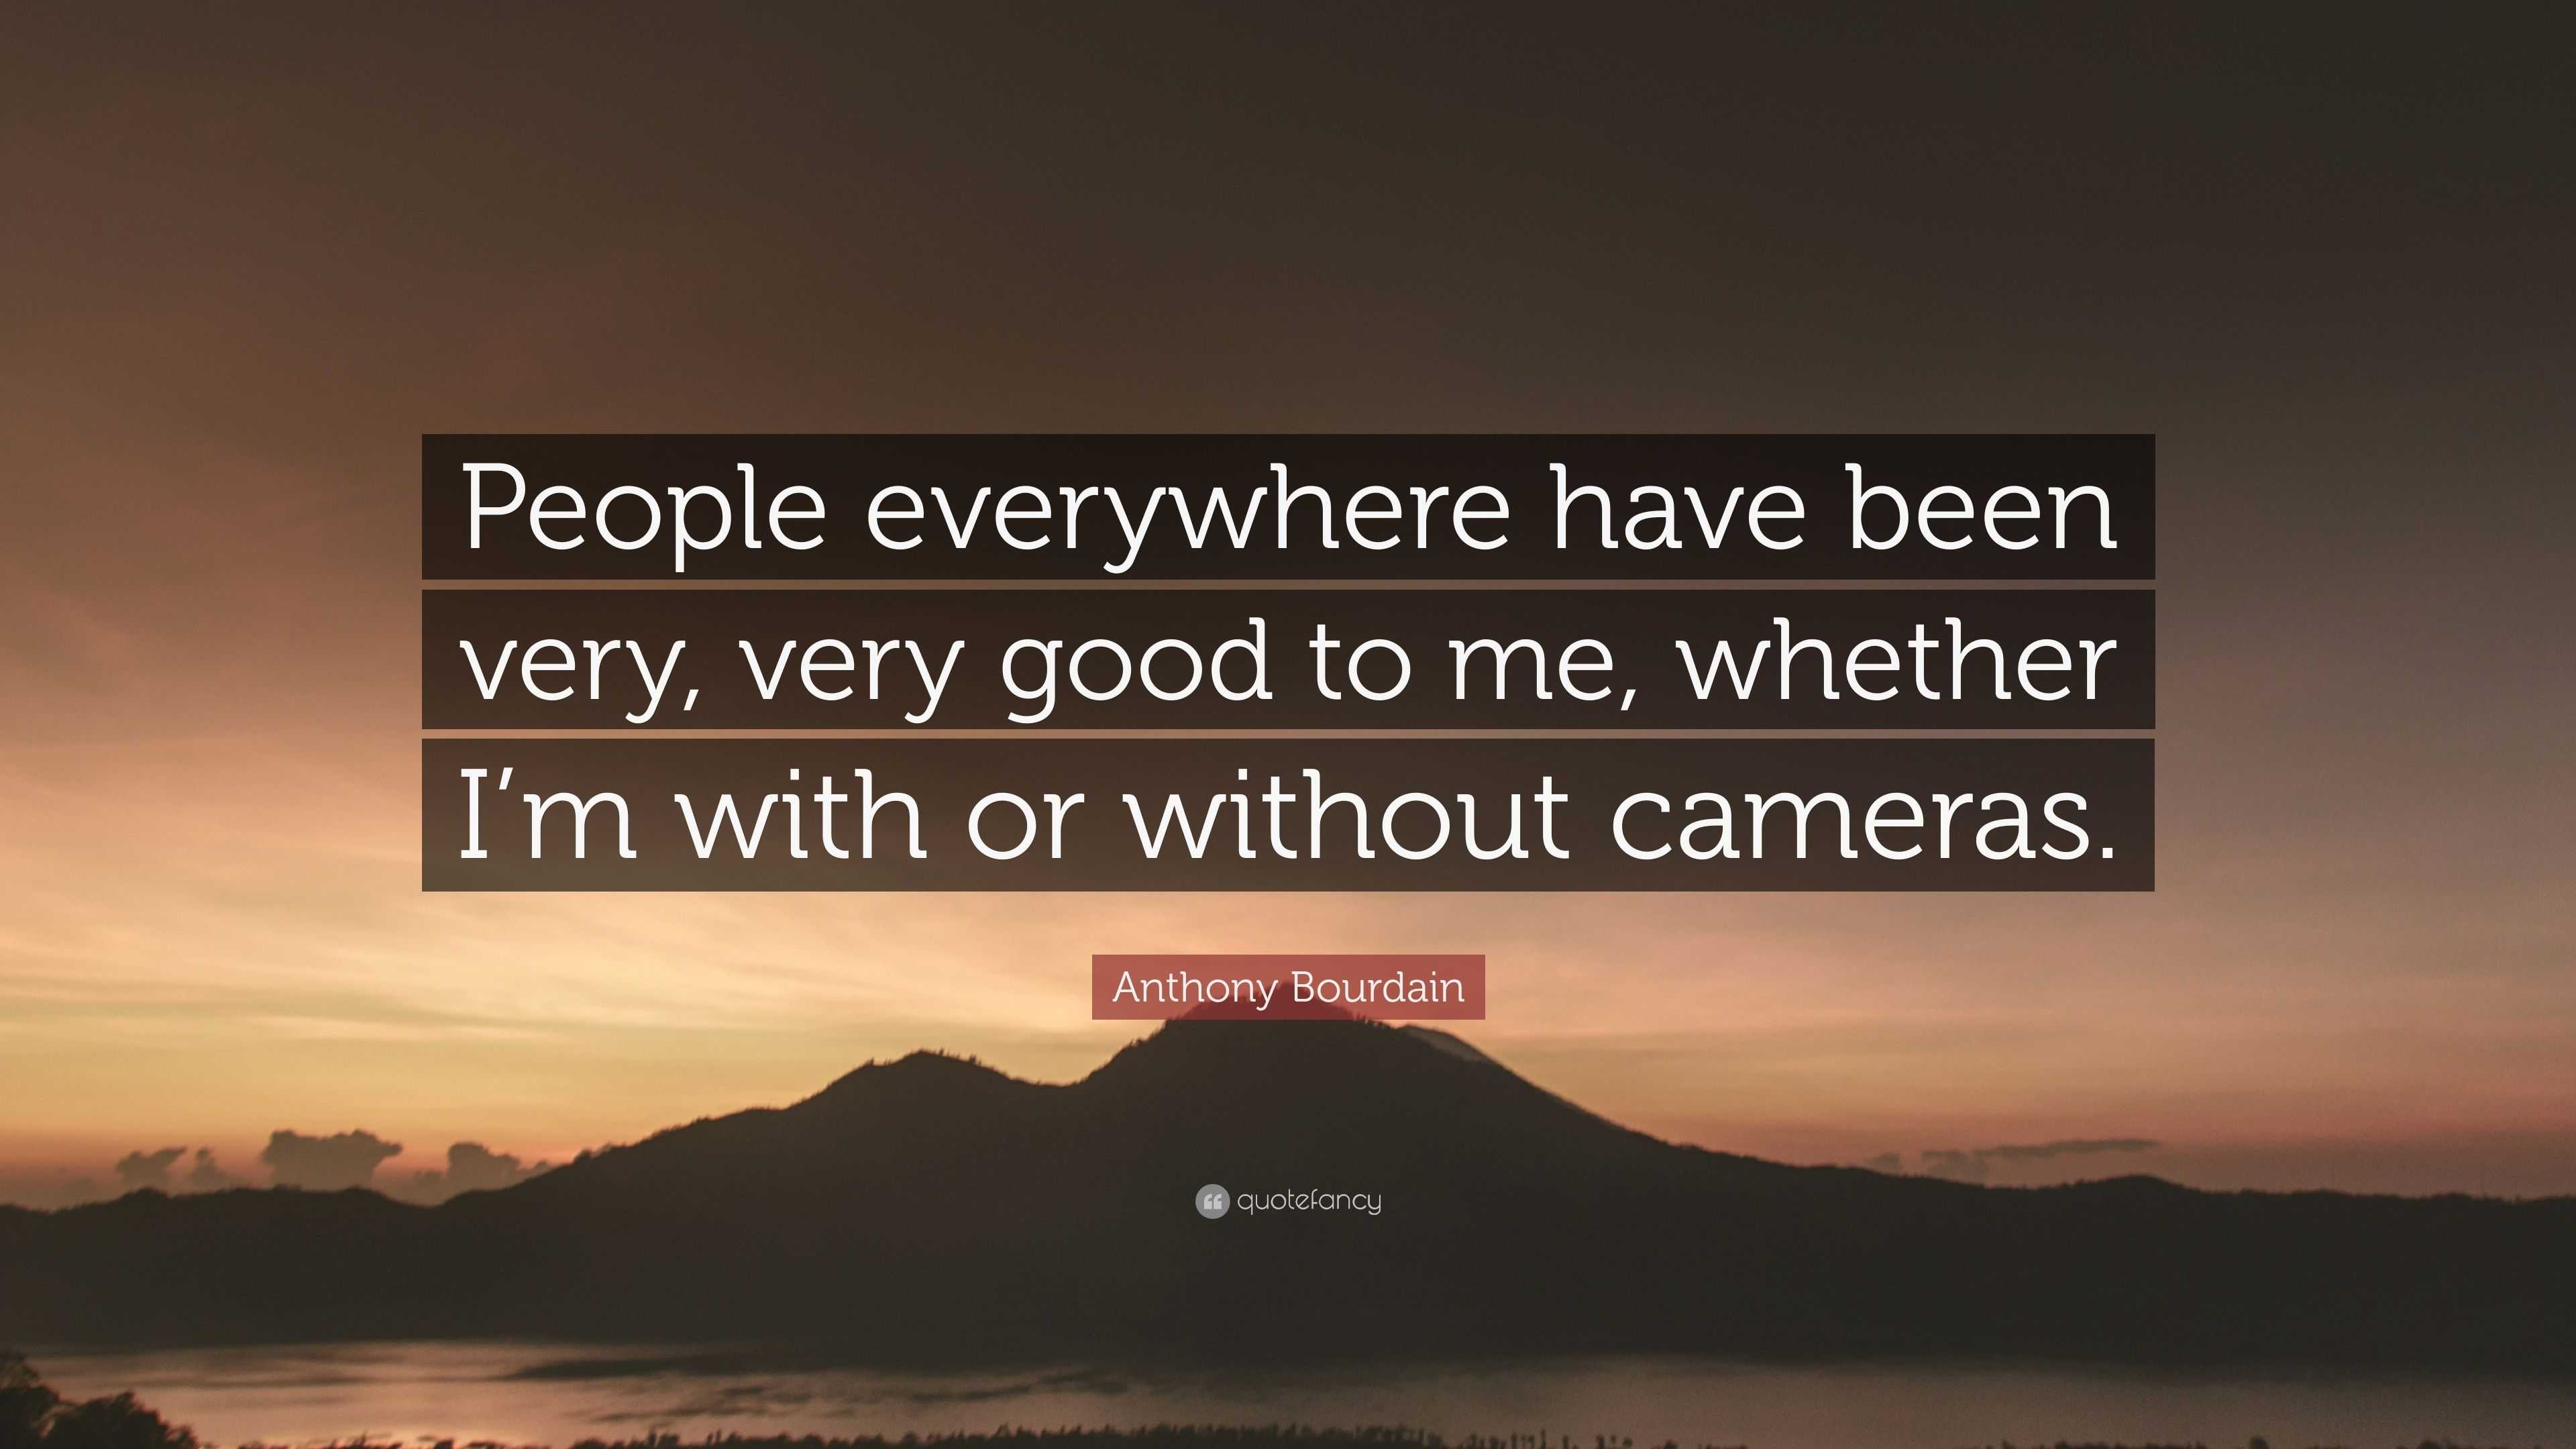 Anthony Bourdain Quote: “People everywhere have been very, very good to ...